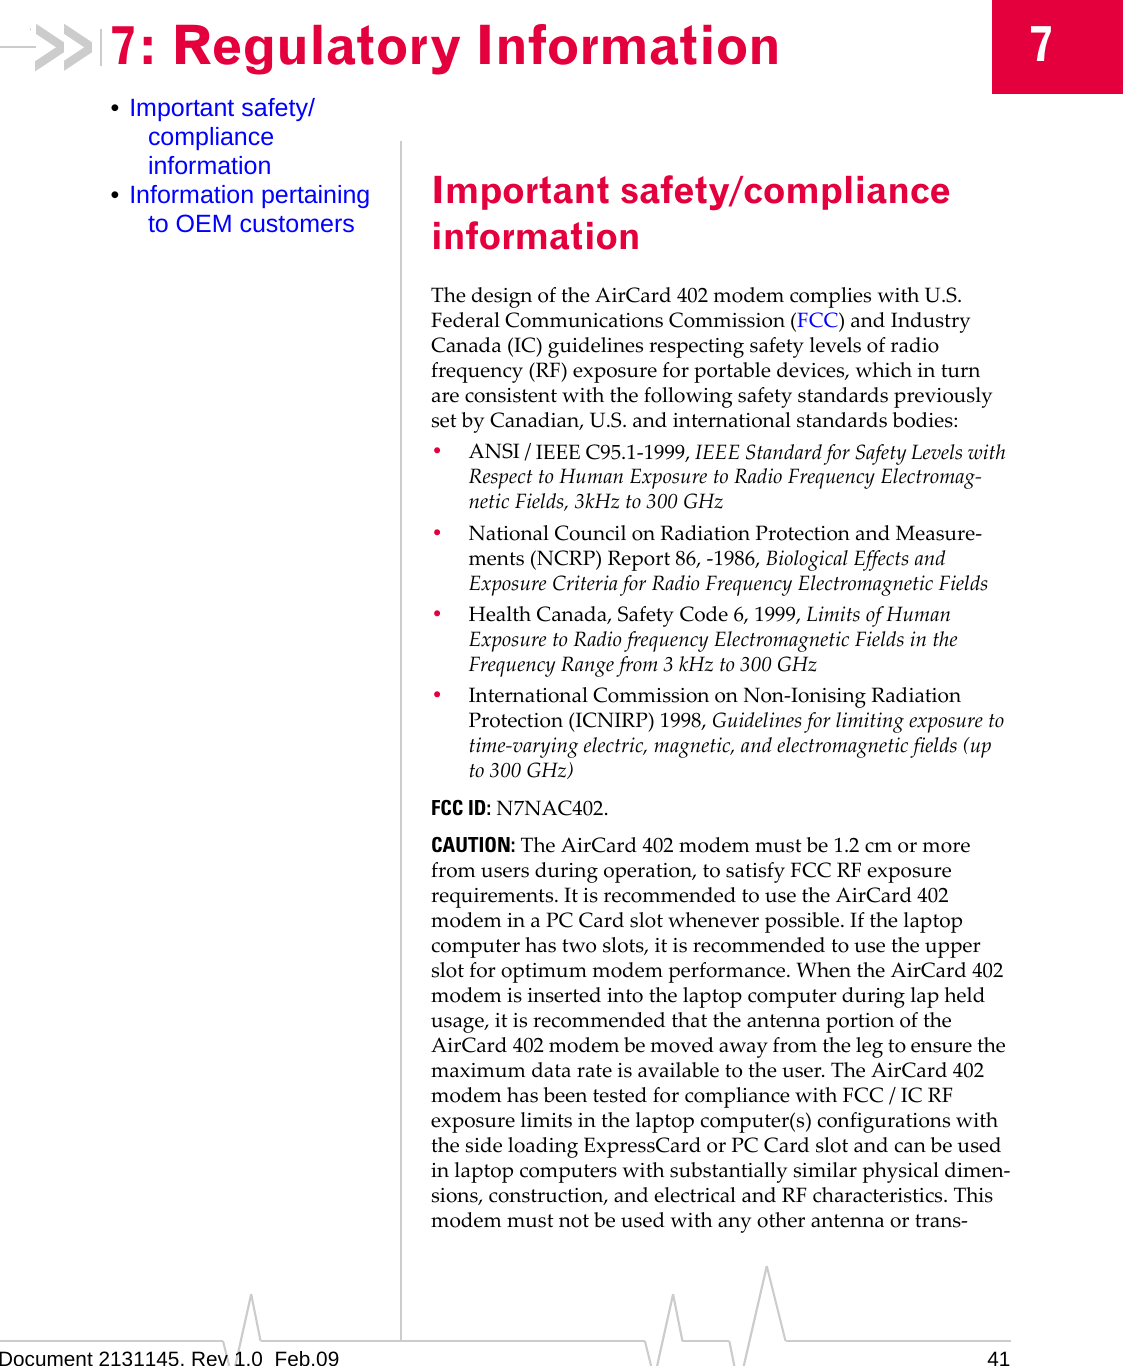 Document 2131145. Rev 1.0  Feb.09 4177: Regulatory Information•Important safety/compliance information•Information pertaining to OEM customers Important safety/compliance informationThedesignoftheAirCard 402modemcomplieswithU.S.FederalCommunicationsCommission(FCC)andIndustryCanada(IC)guidelinesrespectingsafetylevelsofradiofrequency(RF)exposureforportabledevices,whichinturnareconsistentwiththefollowingsafetystandardspreviouslysetbyCanadian,U.S.andinternationalstandardsbodies:•ANSI/IEEEC95.1‐1999,IEEEStandardforSafetyLevelswithRespecttoHumanExposuretoRadioFrequencyElectromag‐neticFields,3kHzto300GHz•NationalCouncilonRadiationProtectionandMeasure‐ments(NCRP)Report86,‐1986,BiologicalEffectsandExposureCriteriaforRadioFrequencyElectromagneticFields•HealthCanada,SafetyCode6,1999,LimitsofHumanExposuretoRadiofrequencyElectromagneticFieldsintheFrequencyRangefrom3kHzto300GHz•InternationalCommissiononNon‐IonisingRadiationProtection(ICNIRP)1998,Guidelinesforlimitingexposuretotime‐varyingelectric,magnetic,andelectromagneticfields(upto300GHz)FCC ID:N7NAC402.CAUTION:TheAirCard 402modemmustbe1.2 cmormorefromusersduringoperation,tosatisfyFCCRFexposurerequirements.ItisrecommendedtousetheAirCard 402modeminaPCCardslotwheneverpossible.Ifthelaptopcomputerhastwoslots,itisrecommendedtousetheupperslotforoptimummodemperformance.WhentheAirCard 402modemisinsertedintothelaptopcomputerduringlapheldusage,itisrecommendedthattheantennaportionoftheAirCard 402modembemovedawayfromthelegtoensurethemaximumdatarateisavailabletotheuser.TheAirCard 402modemhasbeentestedforcompliancewithFCC/ICRFexposurelimitsinthelaptopcomputer(s)configurationswiththesideloadingExpressCardorPCCardslotandcanbeusedinlaptopcomputerswithsubstantiallysimilarphysicaldimen‐sions,construction,andelectricalandRFcharacteristics.Thismodemmustnotbeusedwithanyotherantennaortrans‐